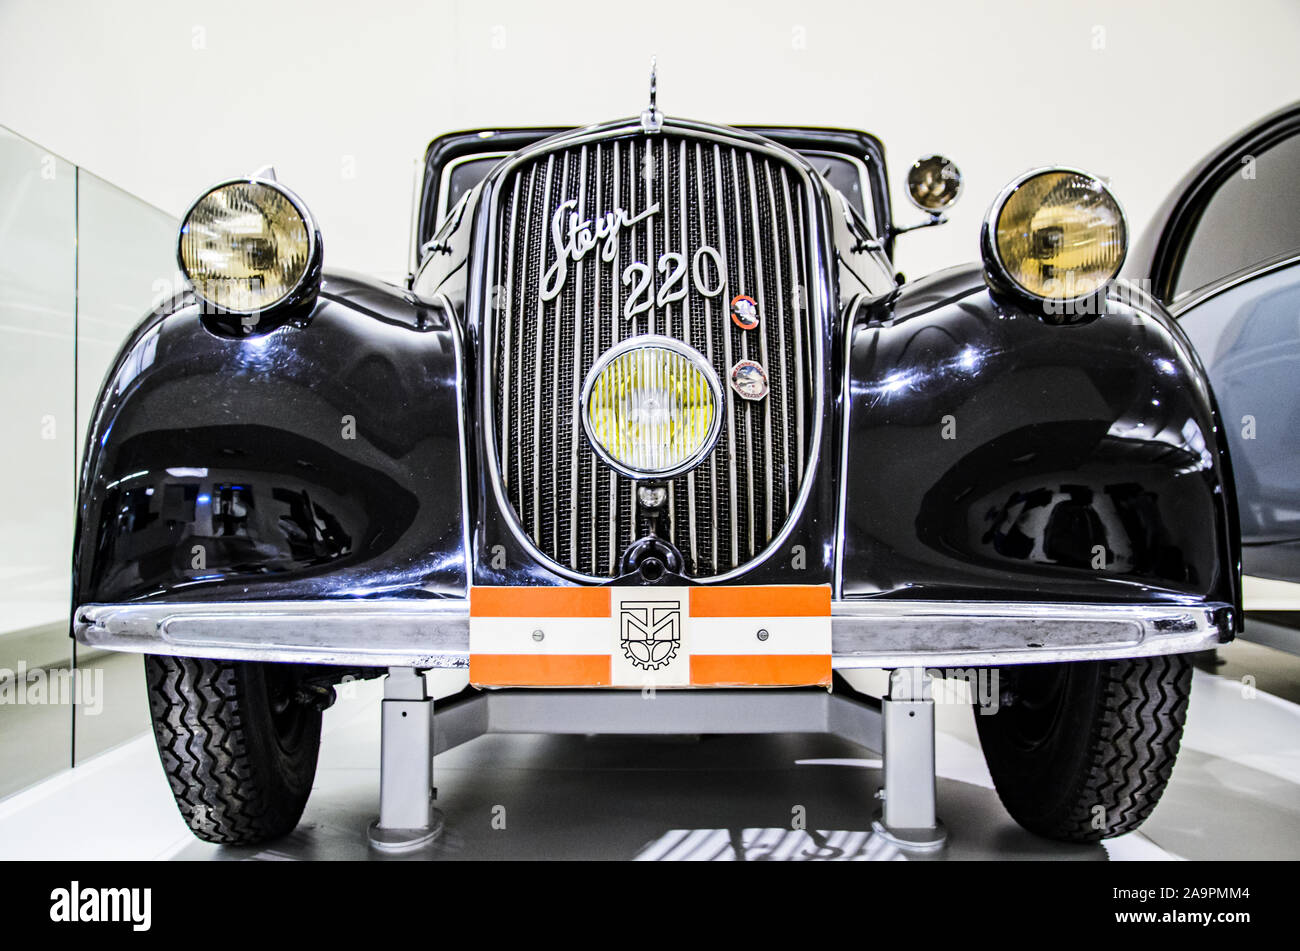 Vienna, Austria 10.01.2015 : Black Steyr 220 classic car from 1937. Photo of exibit in Museum of Technology. Place to visit. Stock Photo